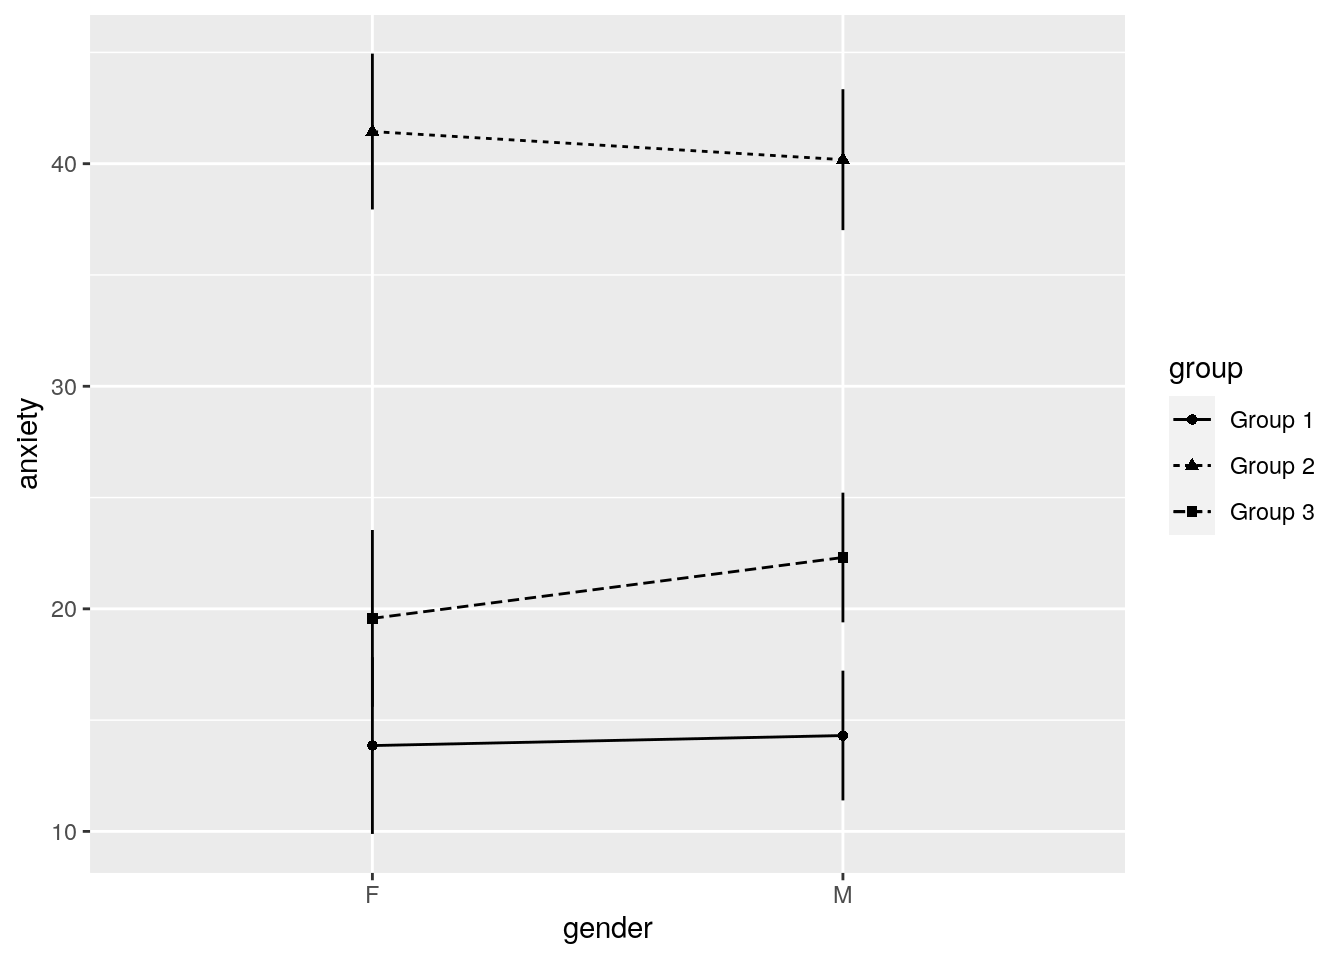 An example plot with afex_plot()